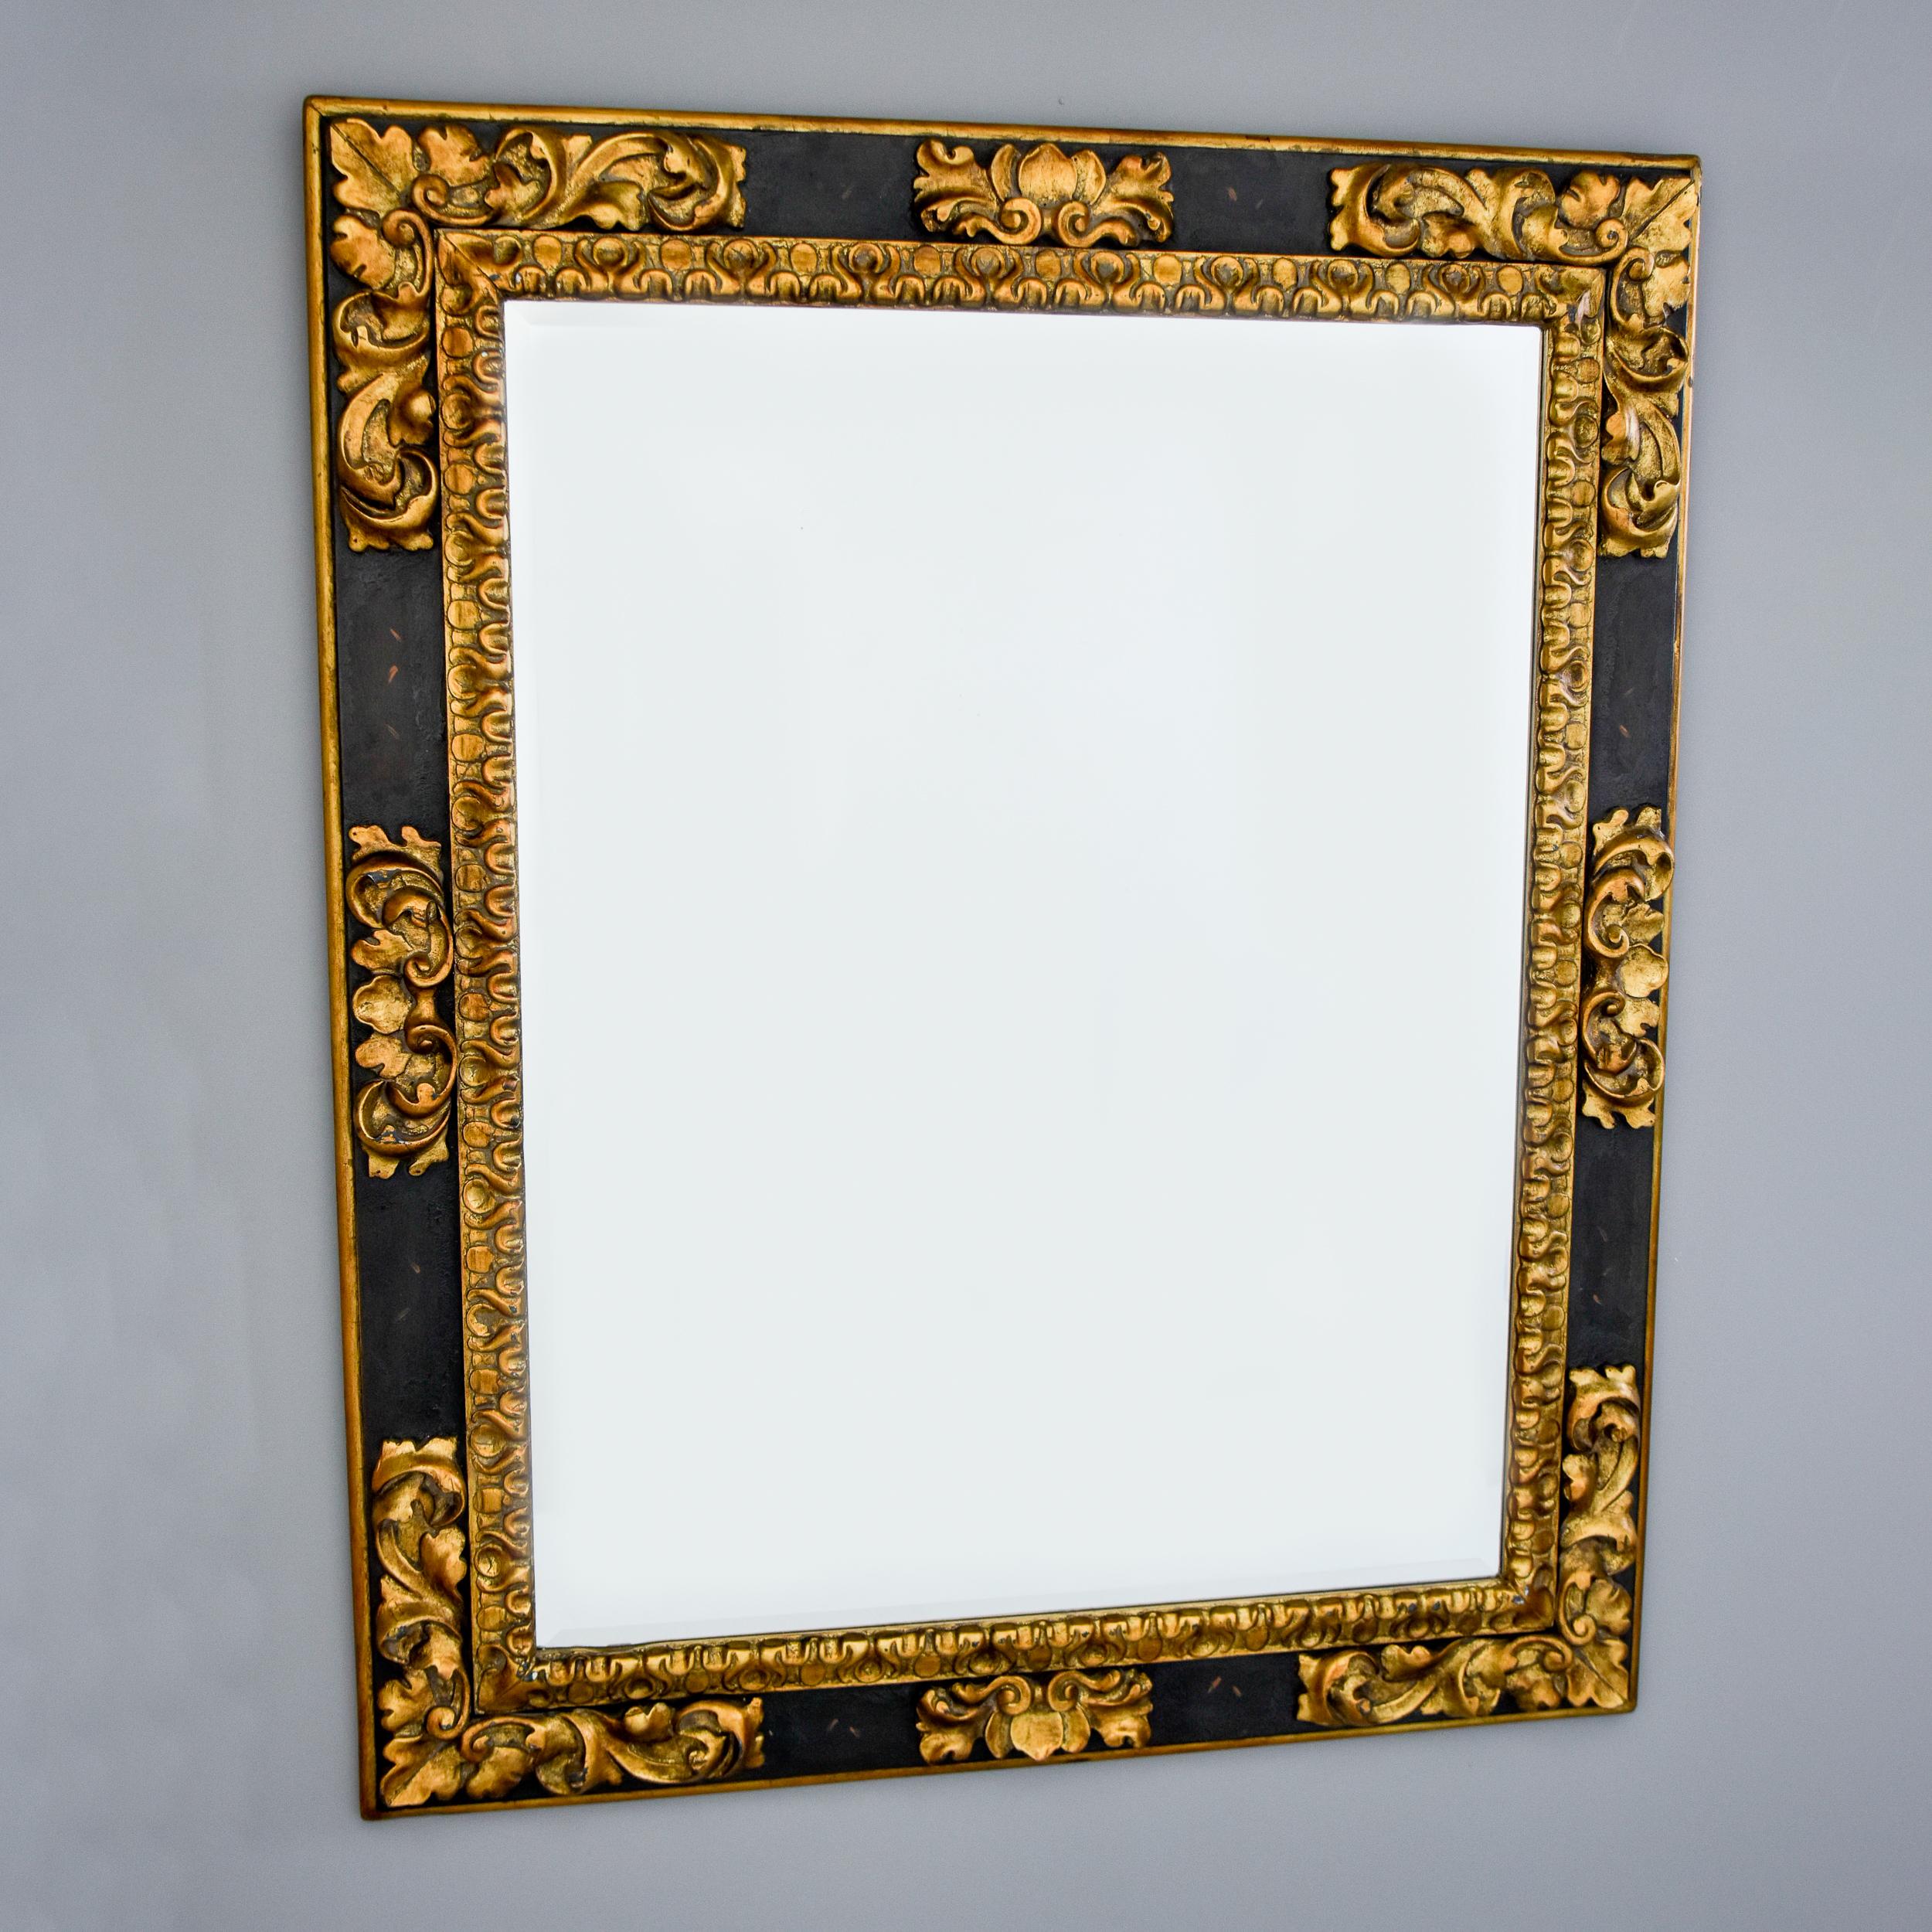 Found in the US, this extra large vintage mirror by Ralph Lauren Polo dates from the 1990s. Rectangular mirror has a beveled edge and sits in a black and gilt wood frame with decorative foliate corners and a giltwood inner border. Actual Mirror